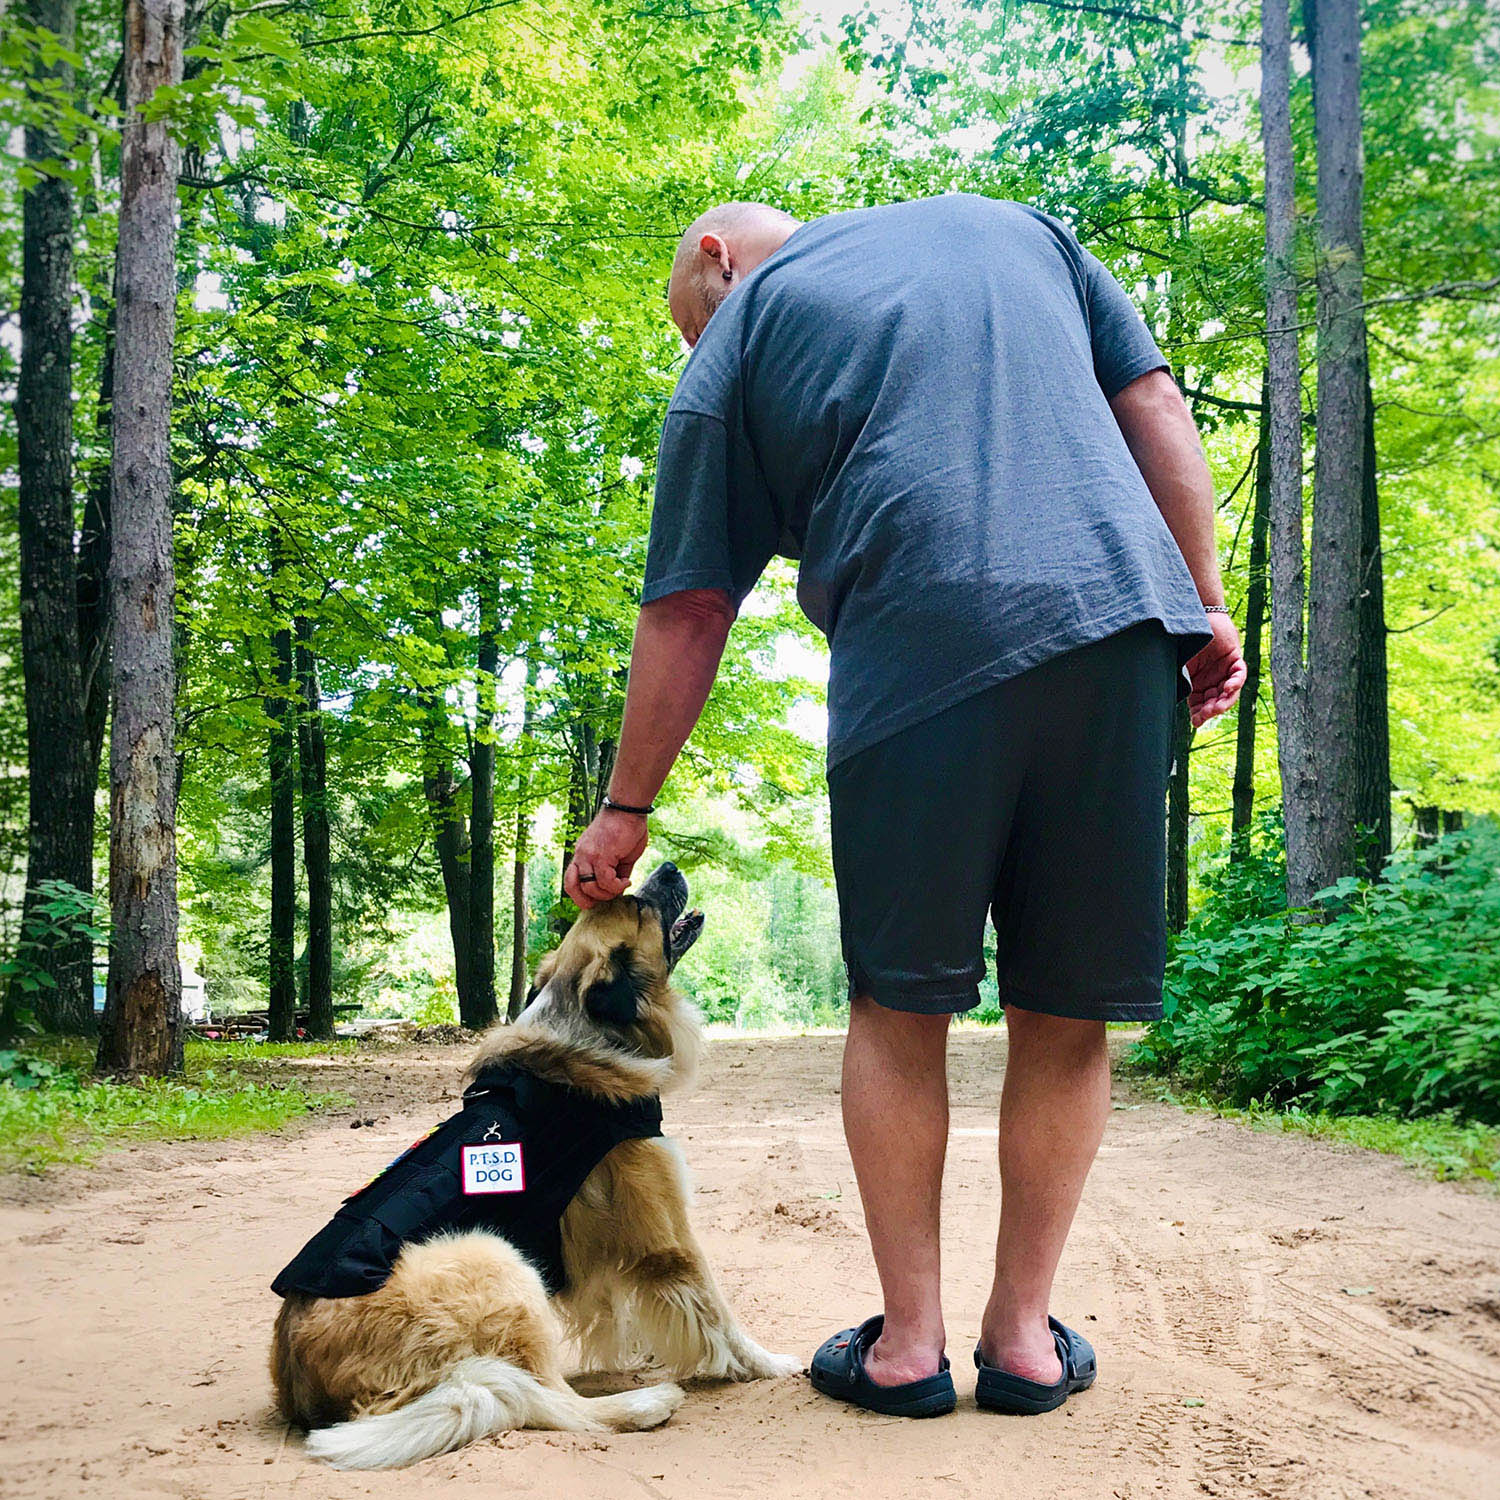 Man with service dog